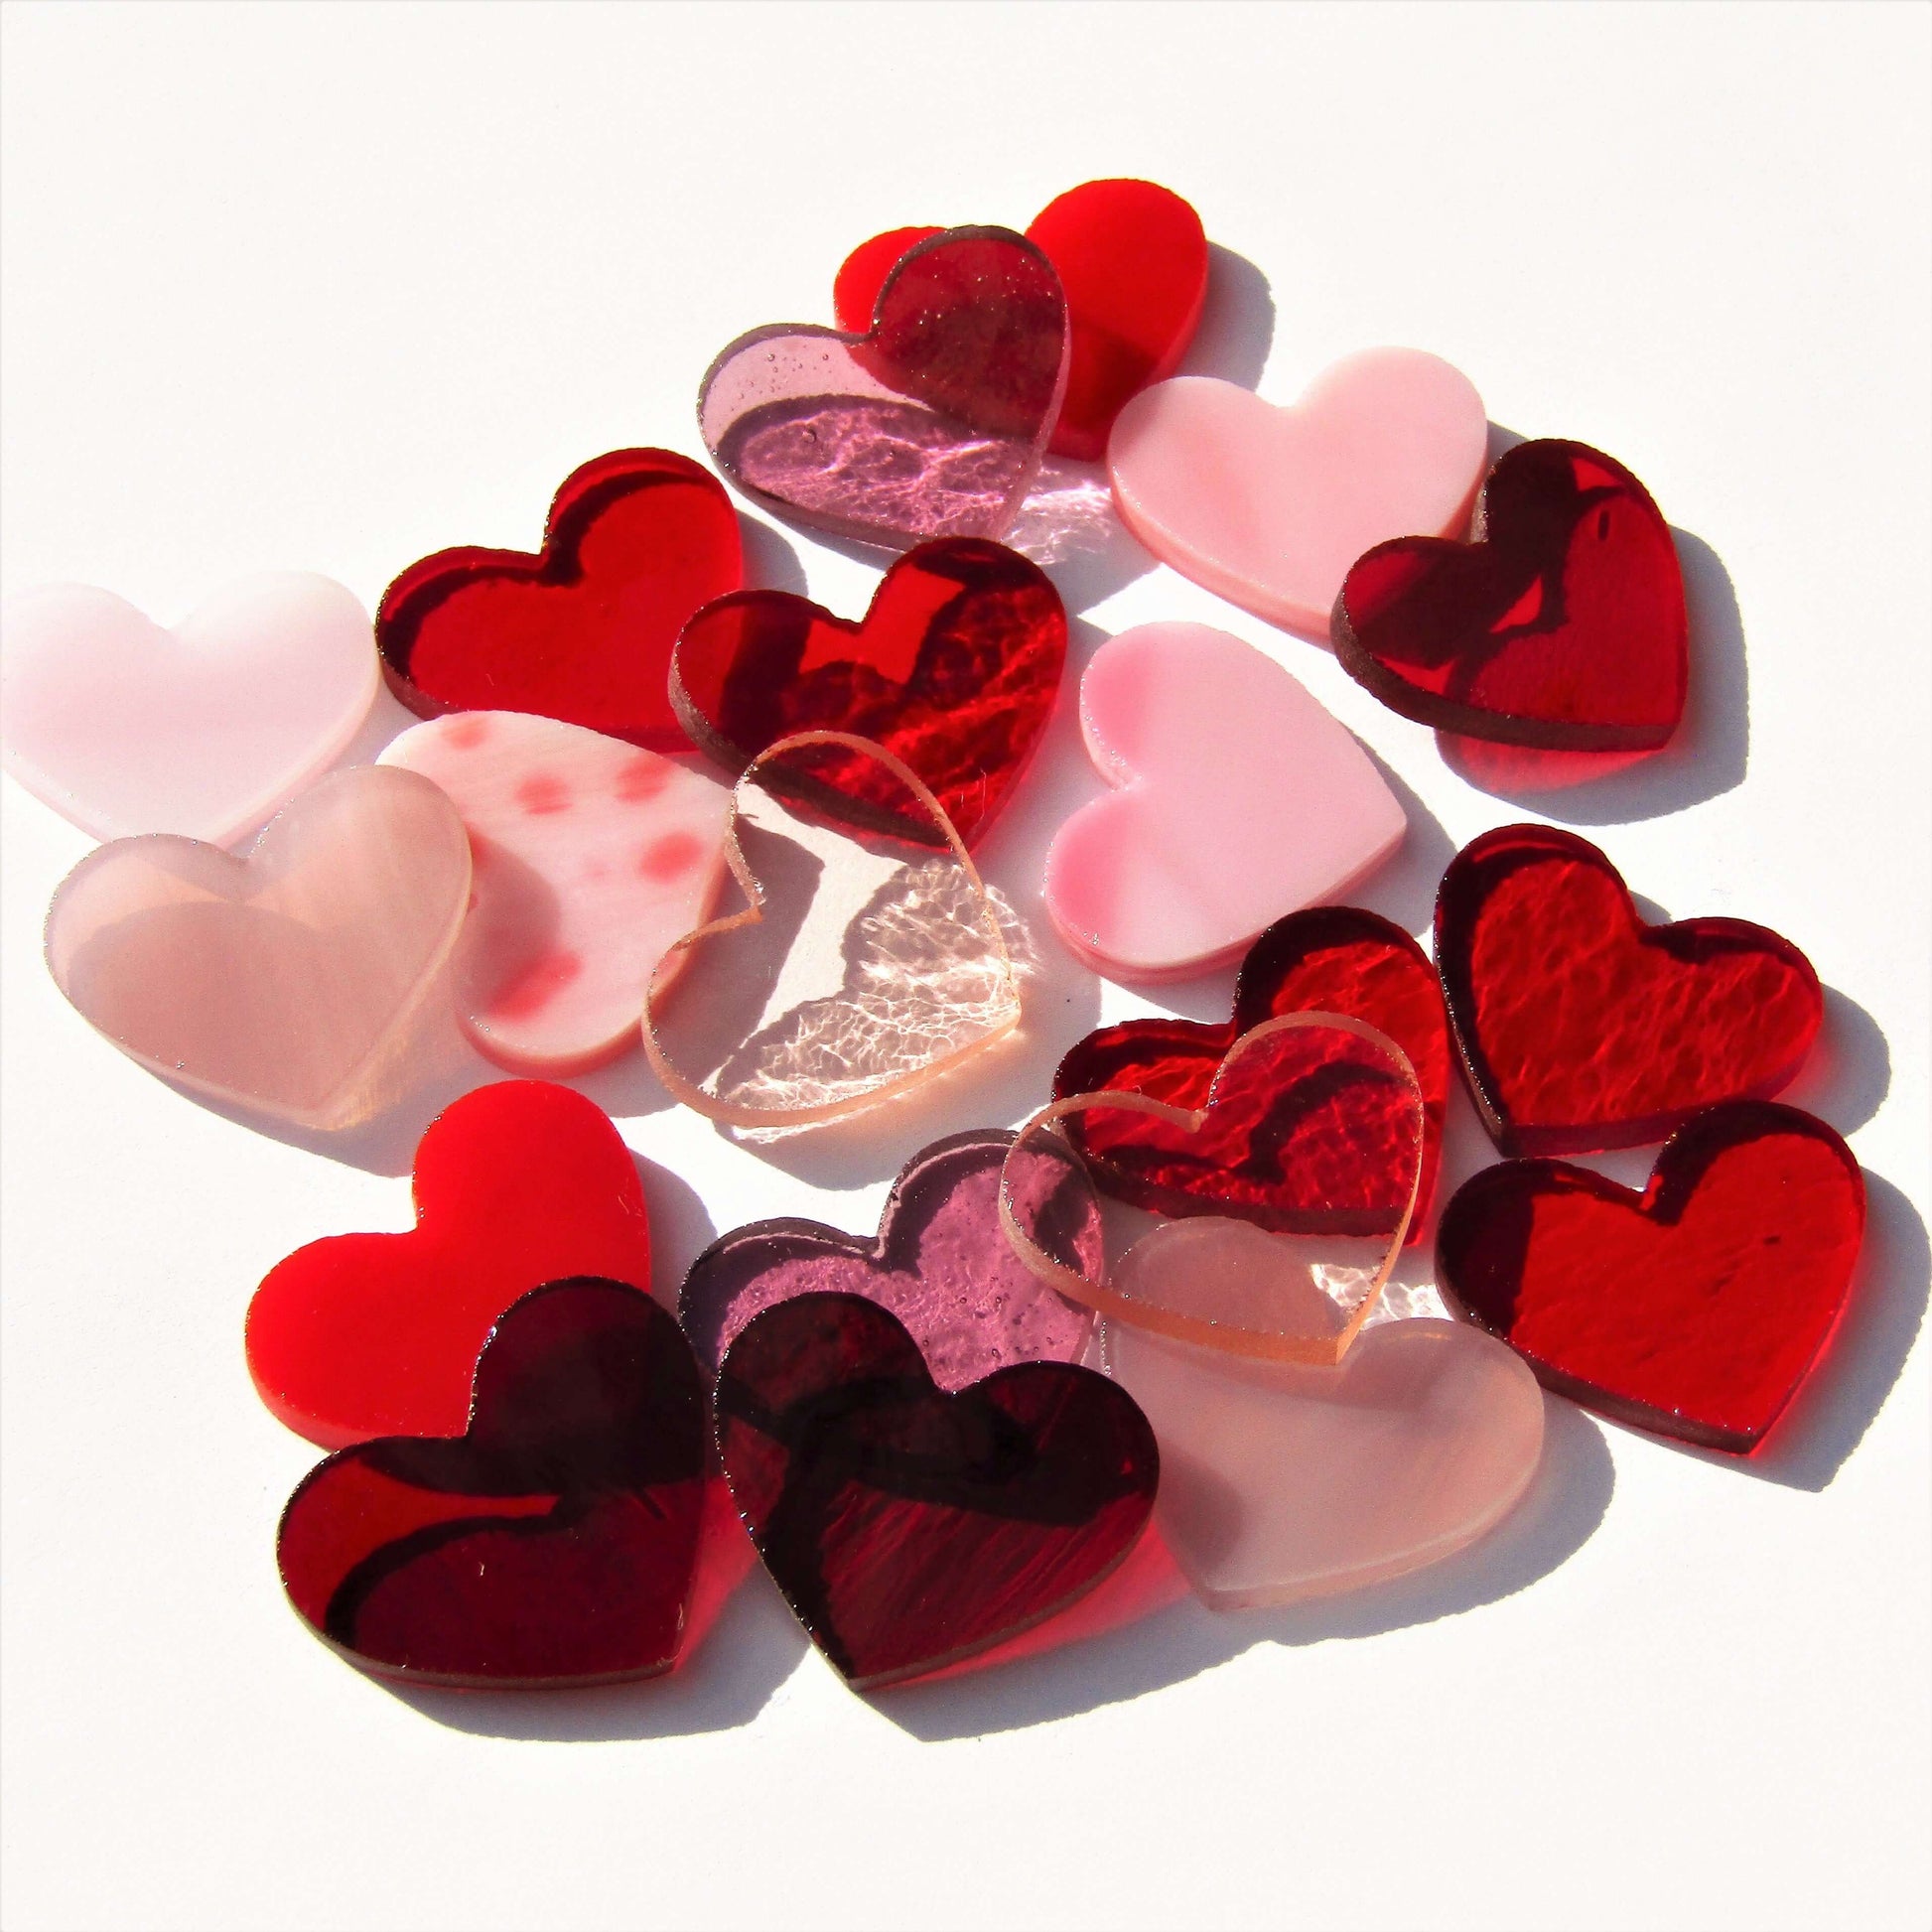 Precut Stained Glass Hearts, Red and Pink 1" Glass Hearts for Mosaics, Jewelry, Stained Glass Art, Package of 20 Glass Valentines, DIY Art Glass Supply